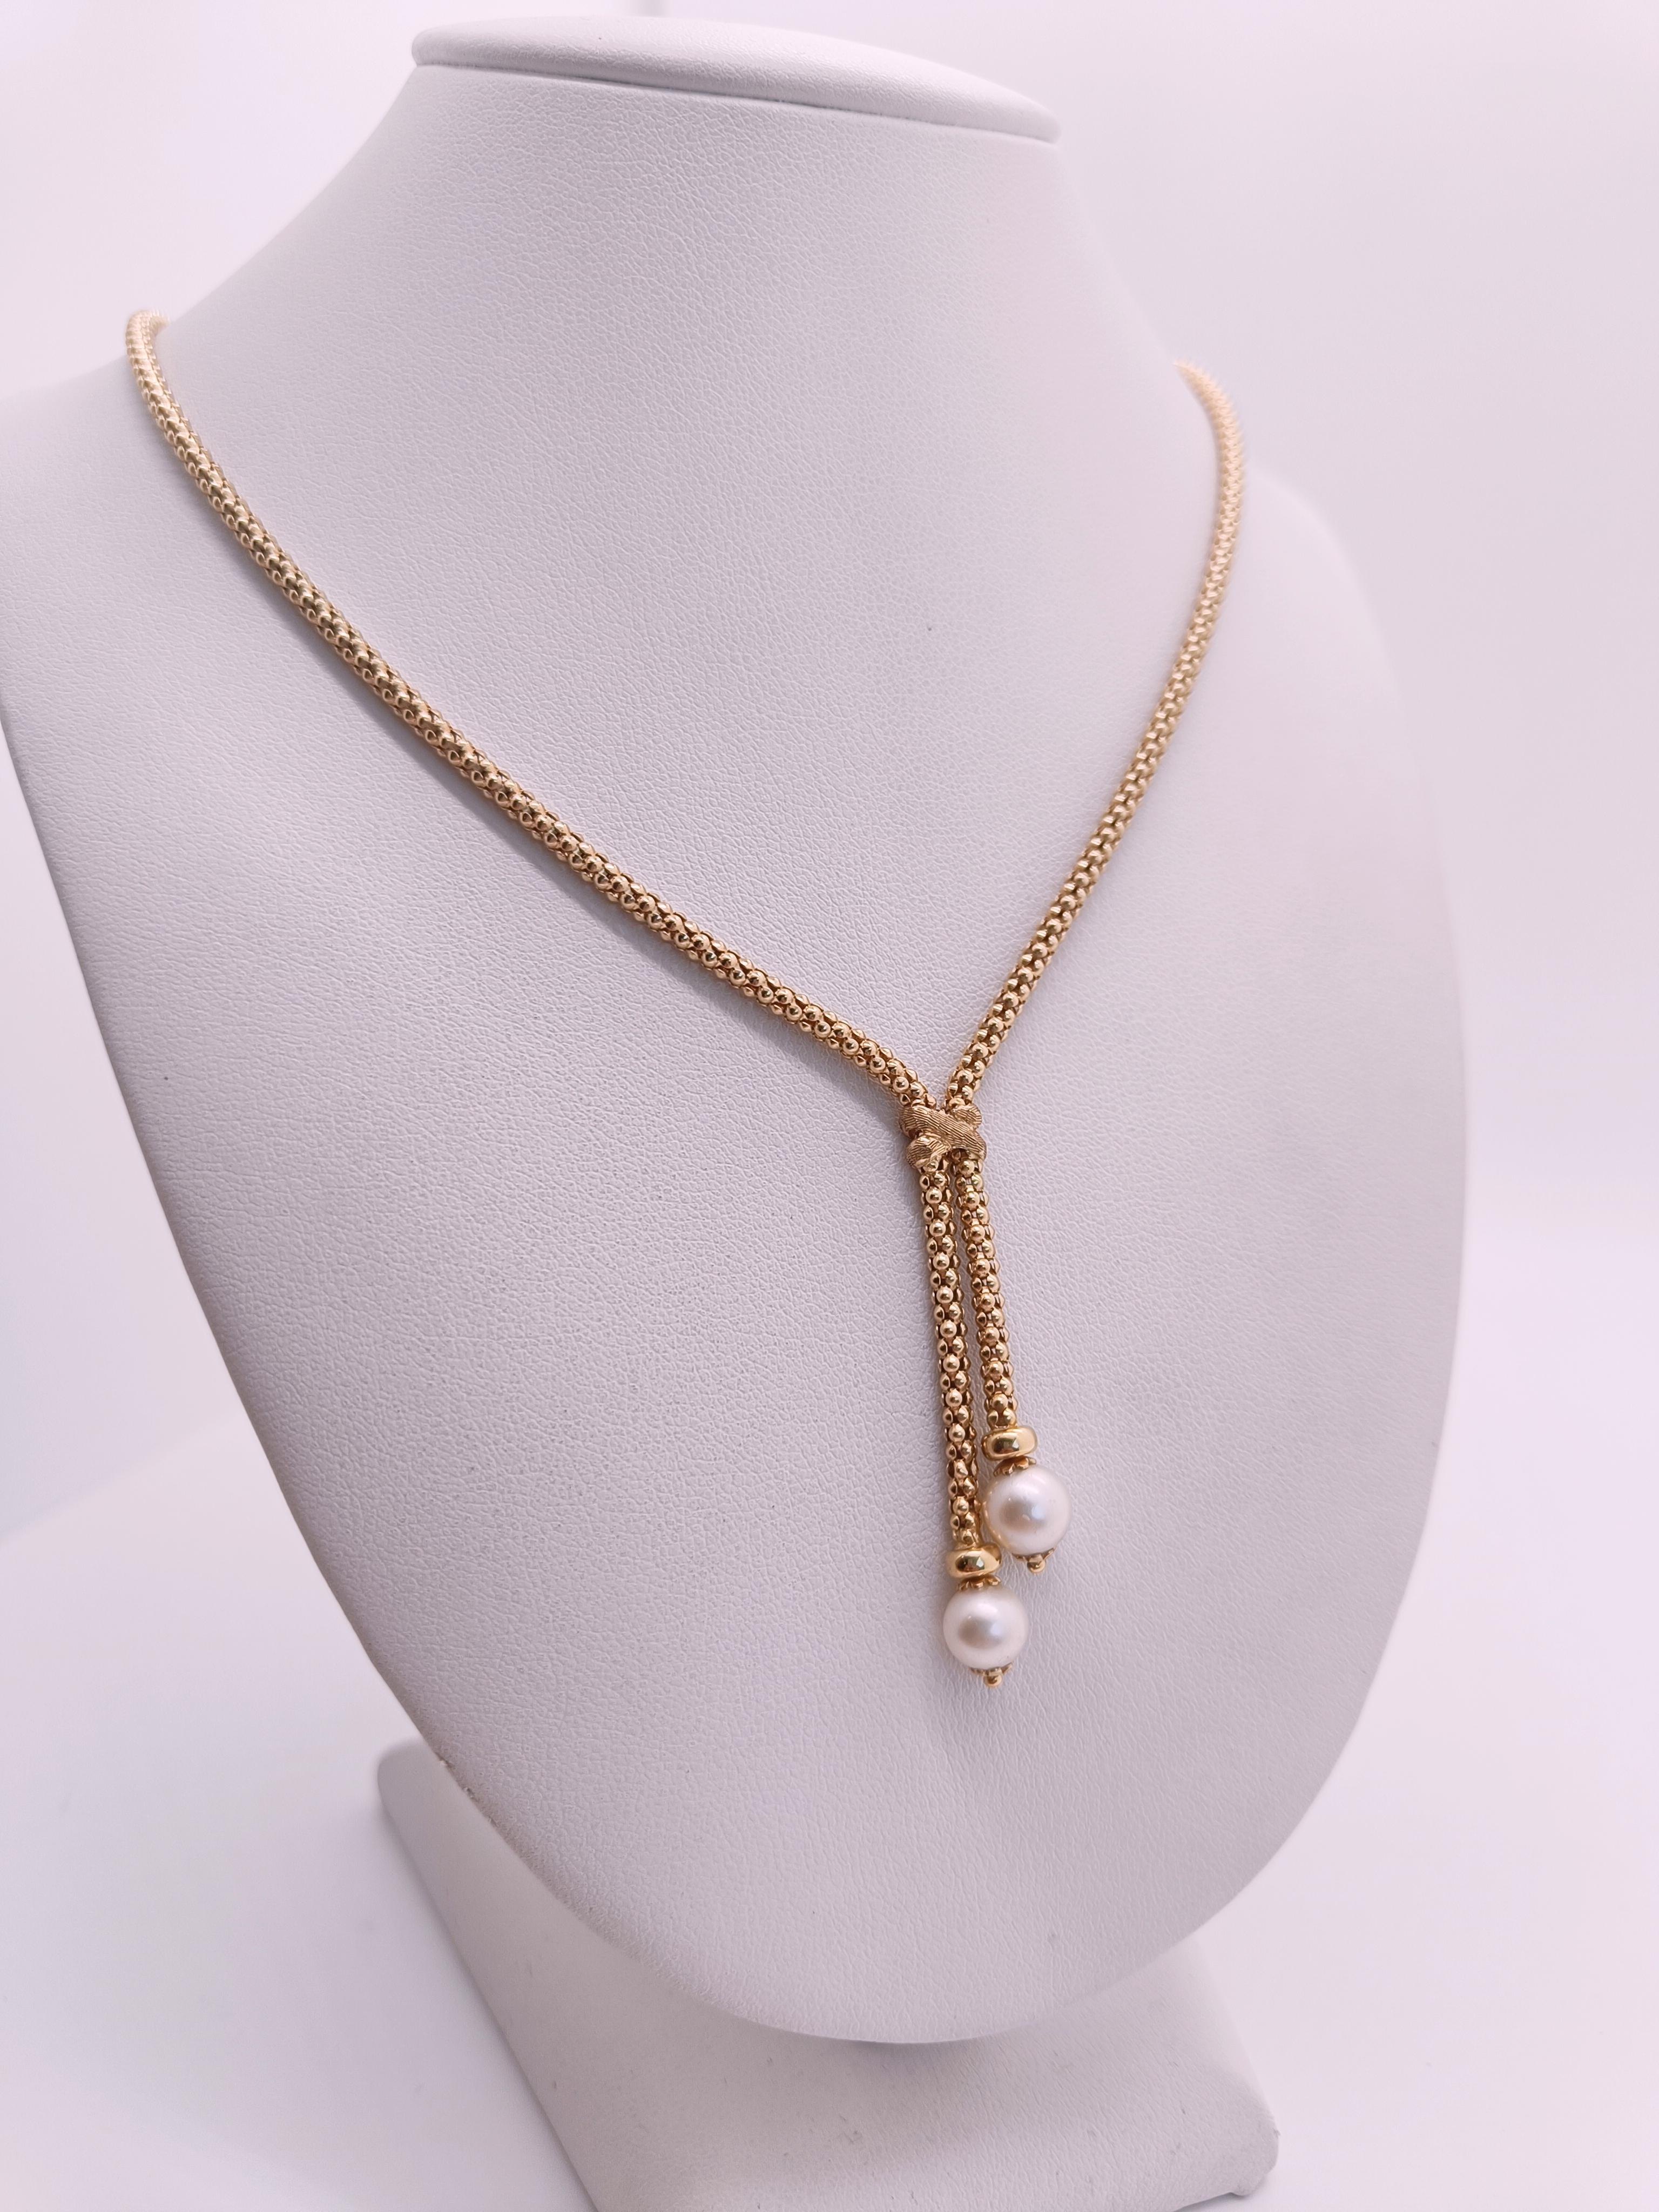 Necklace with Dangling Pearls in 18k Yellow Gold For Sale 2